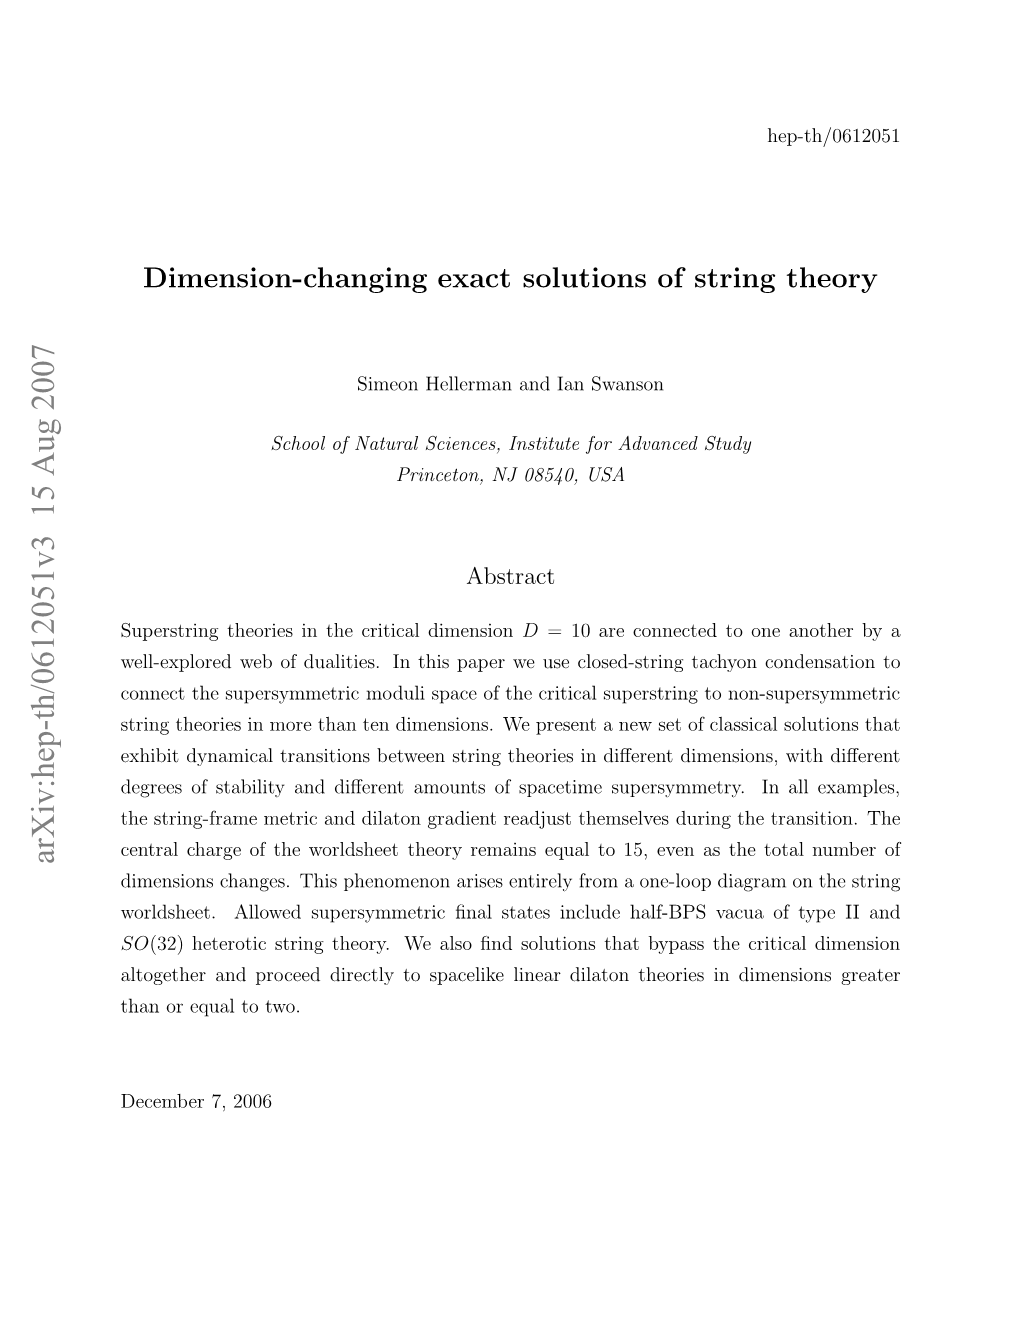 Dimension-Changing Exact Solutions of String Theory